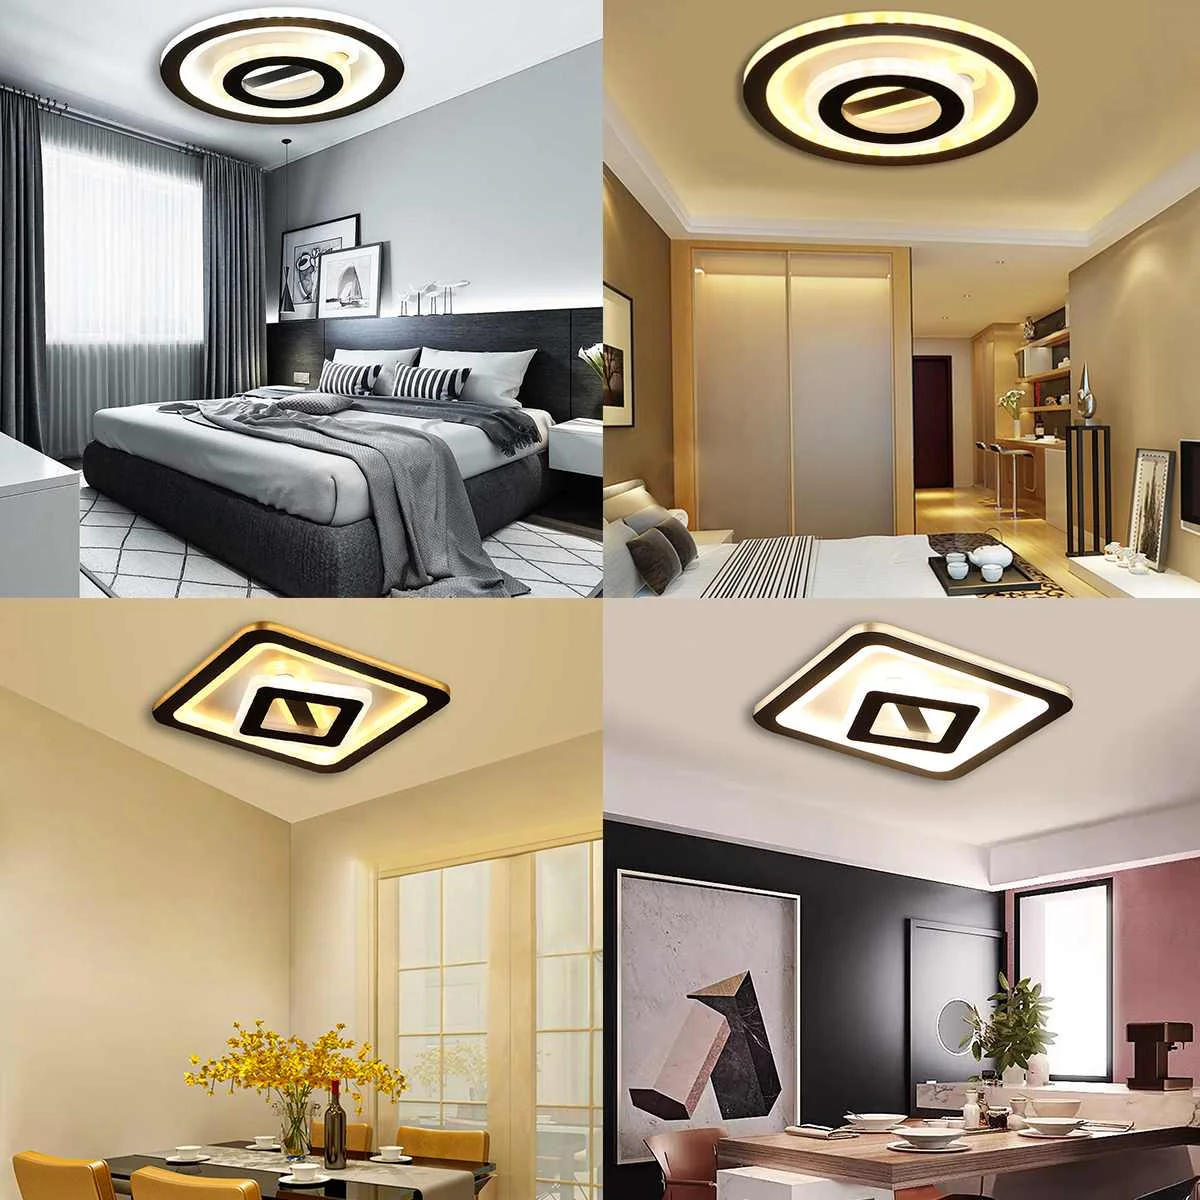 220V Modern LED Ceiling Lights for Kitchen Corridor Night Corridor Balcony Entrance Round Square Simple Ceiling Lamp for Home